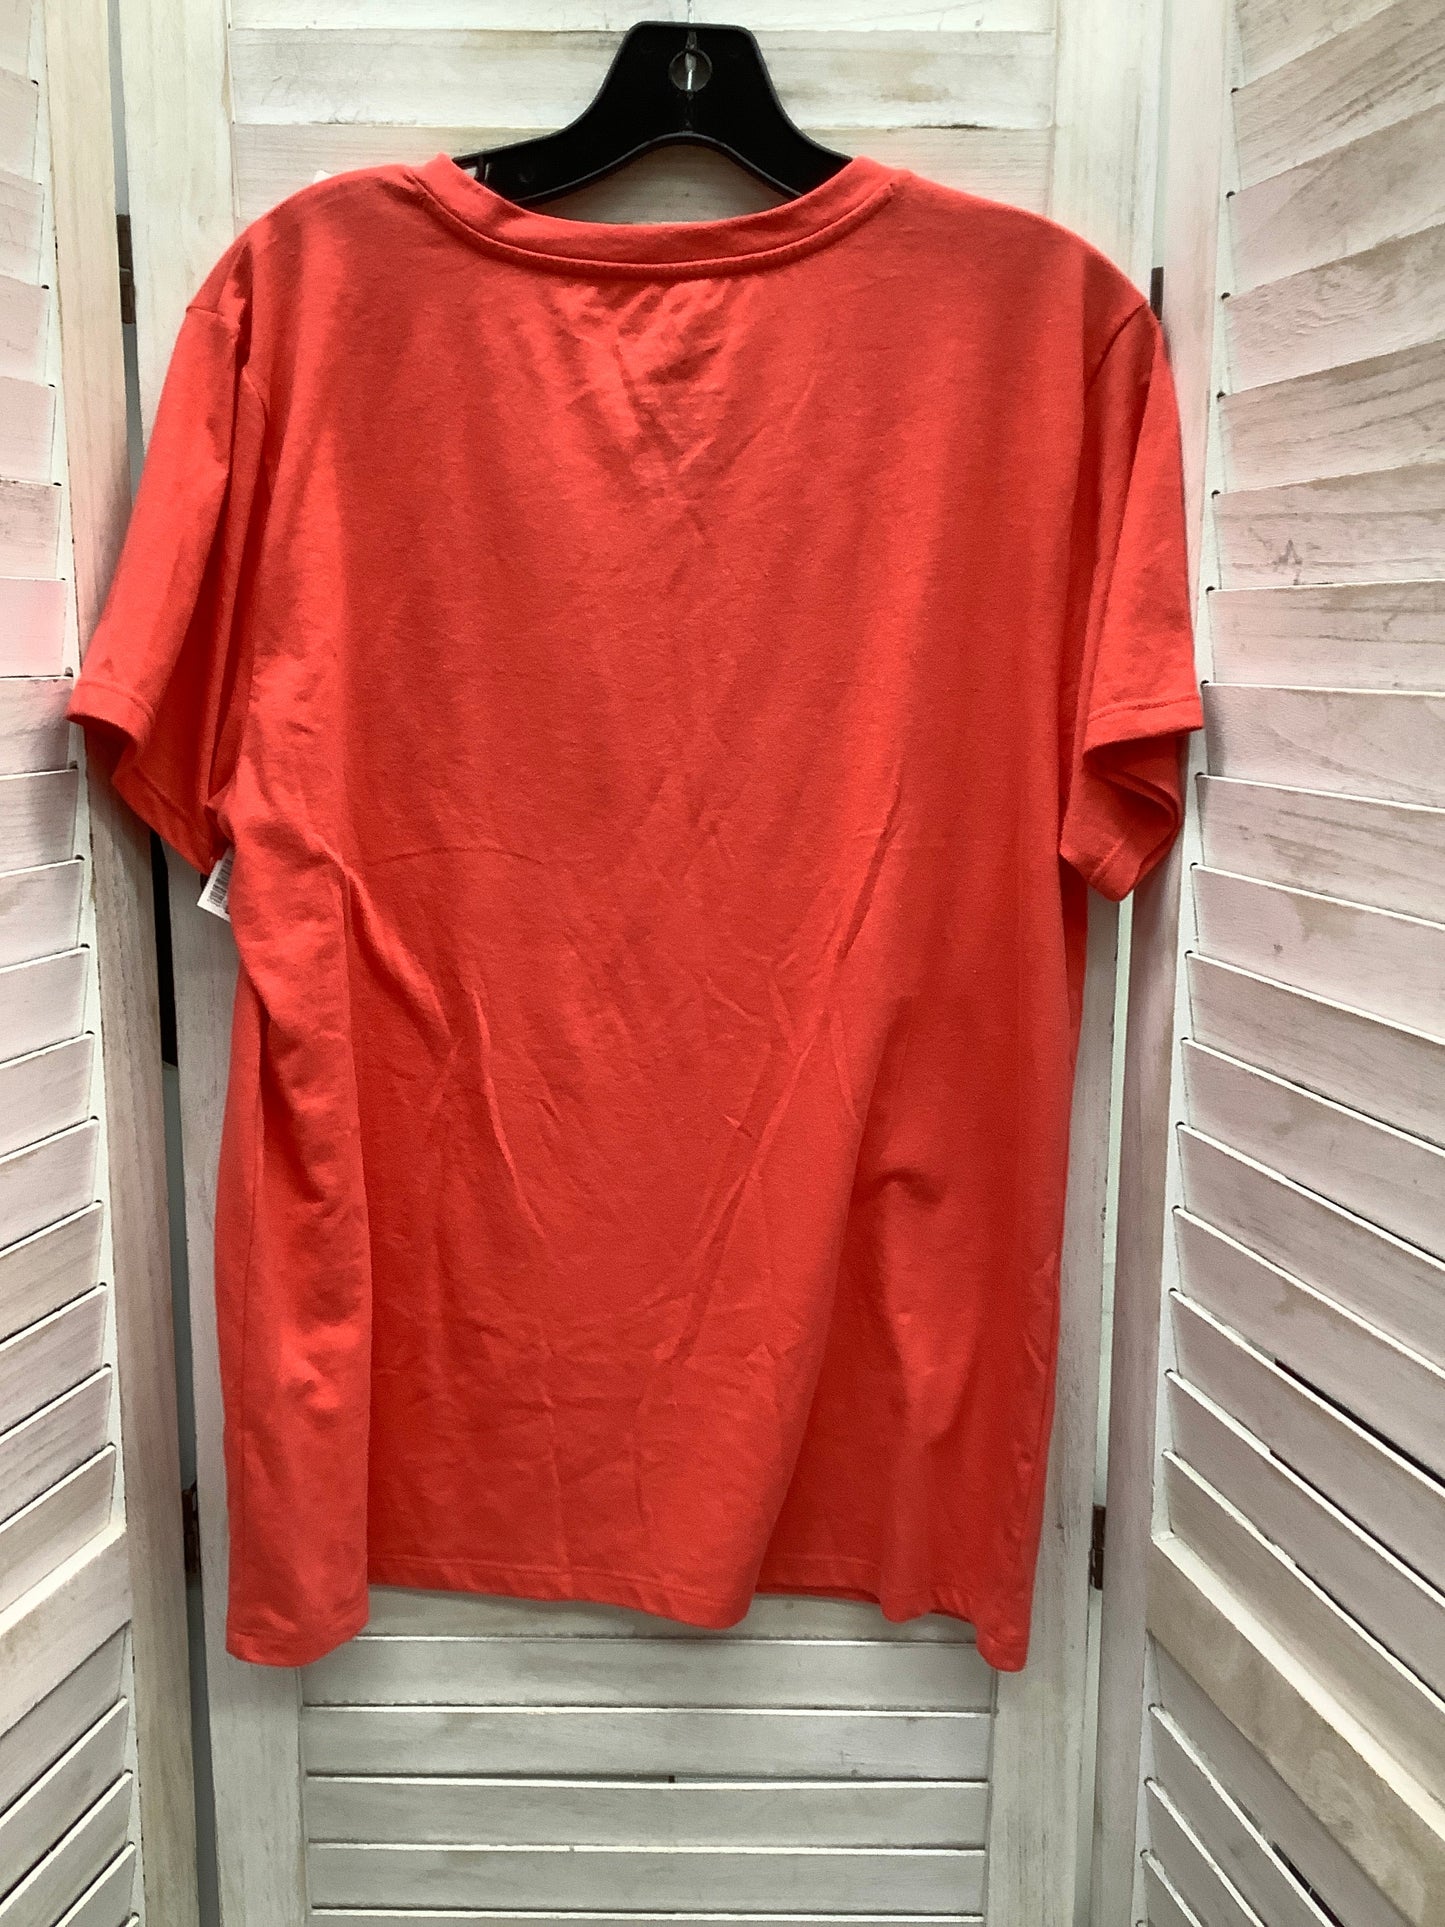 Salmon Top Short Sleeve Basic Clothes Mentor, Size M